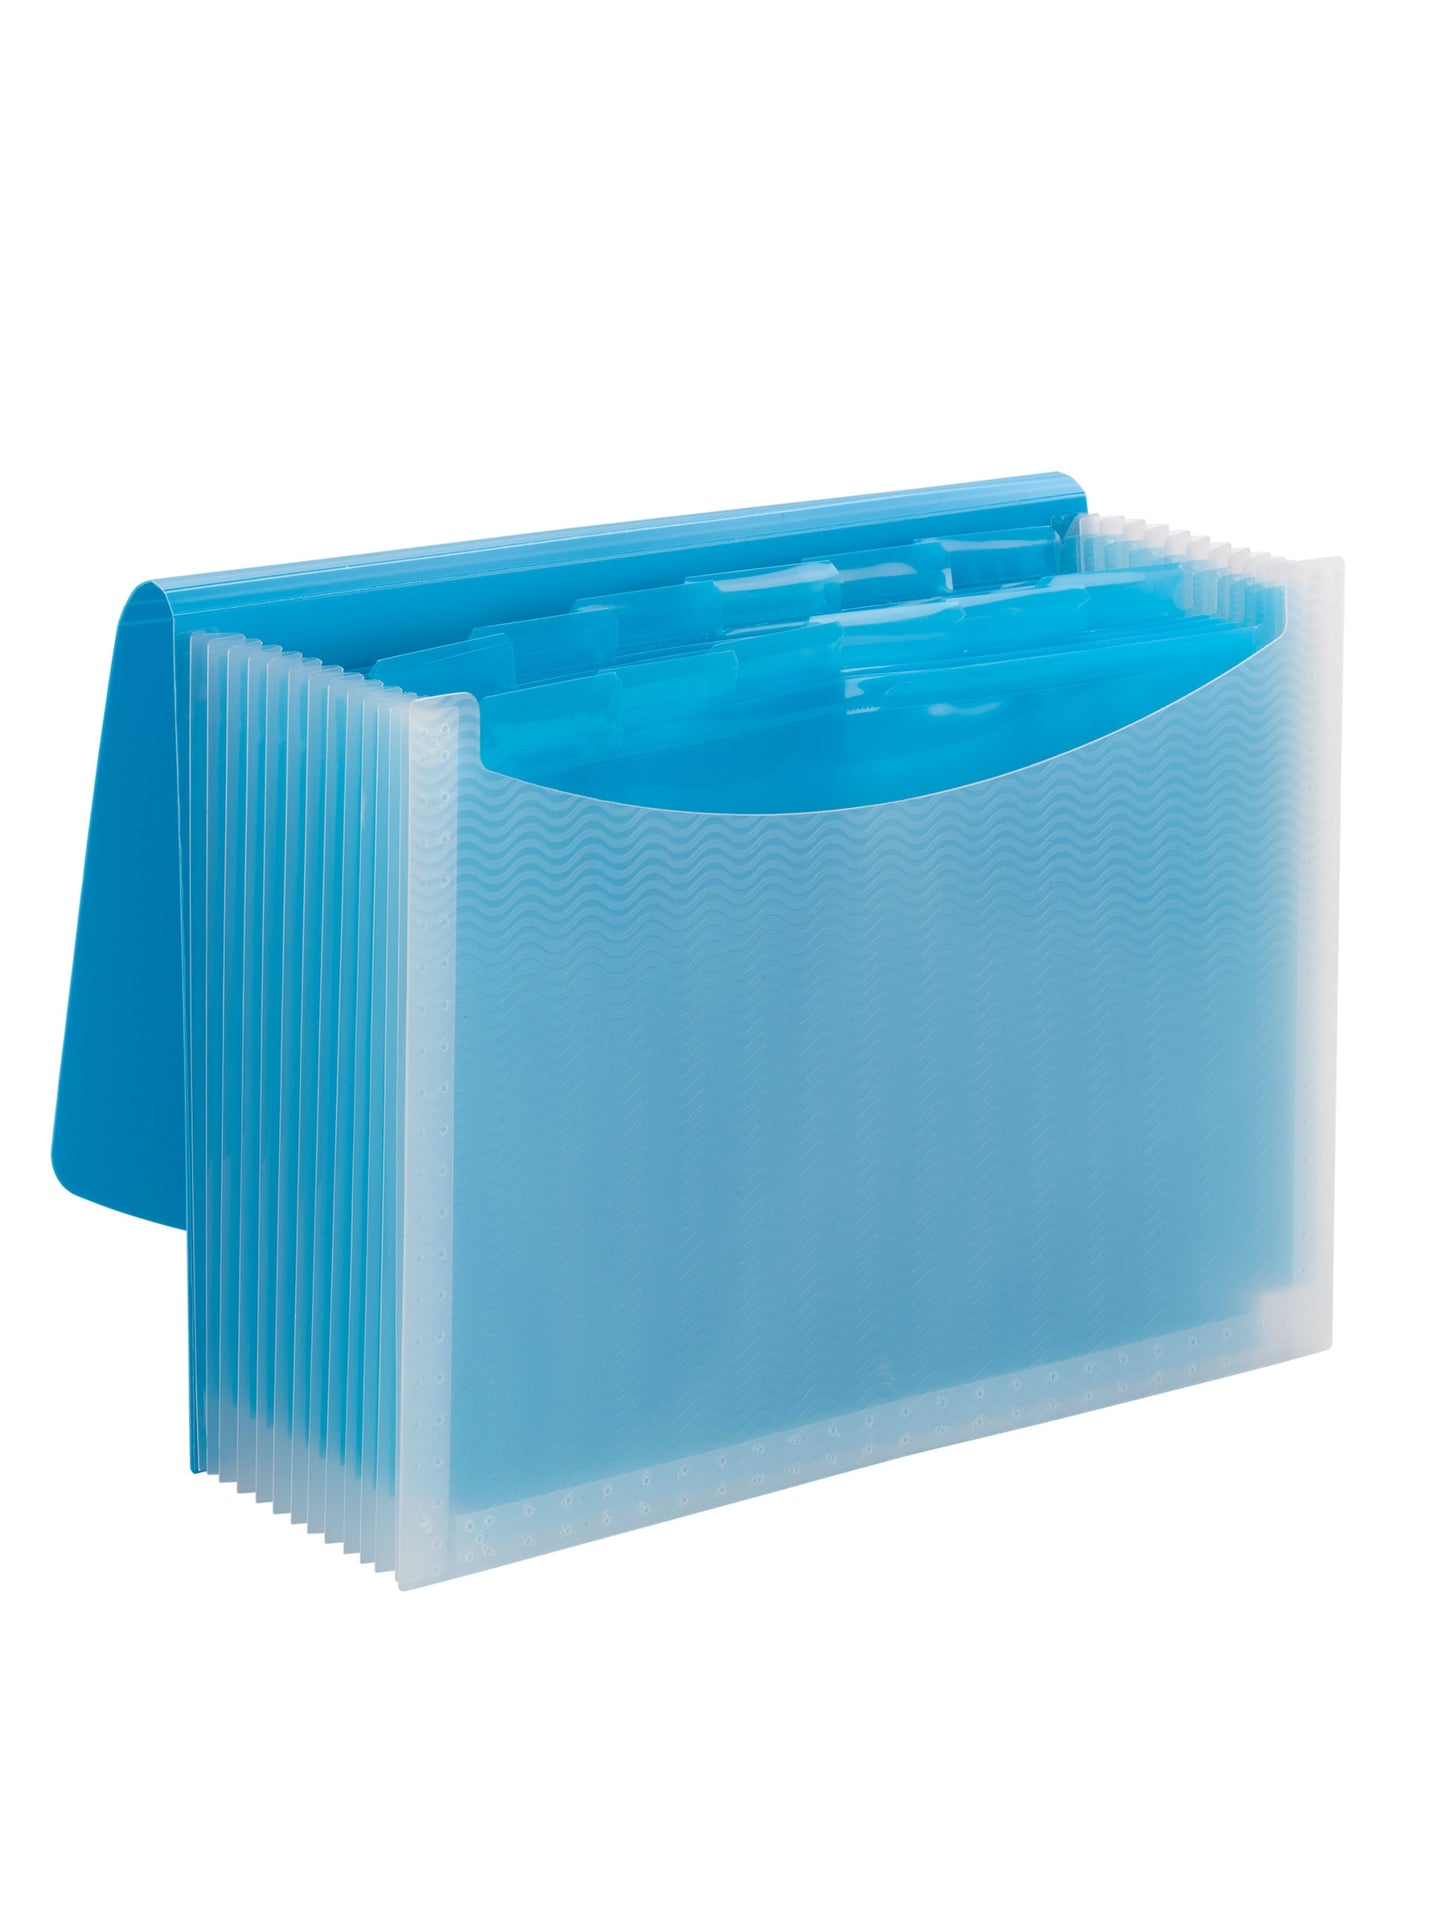 Poly Expanding Files with Flap, 12 Pockets, Wave Pattern, Teal Color, Letter Size, Set of 1, 086486708692